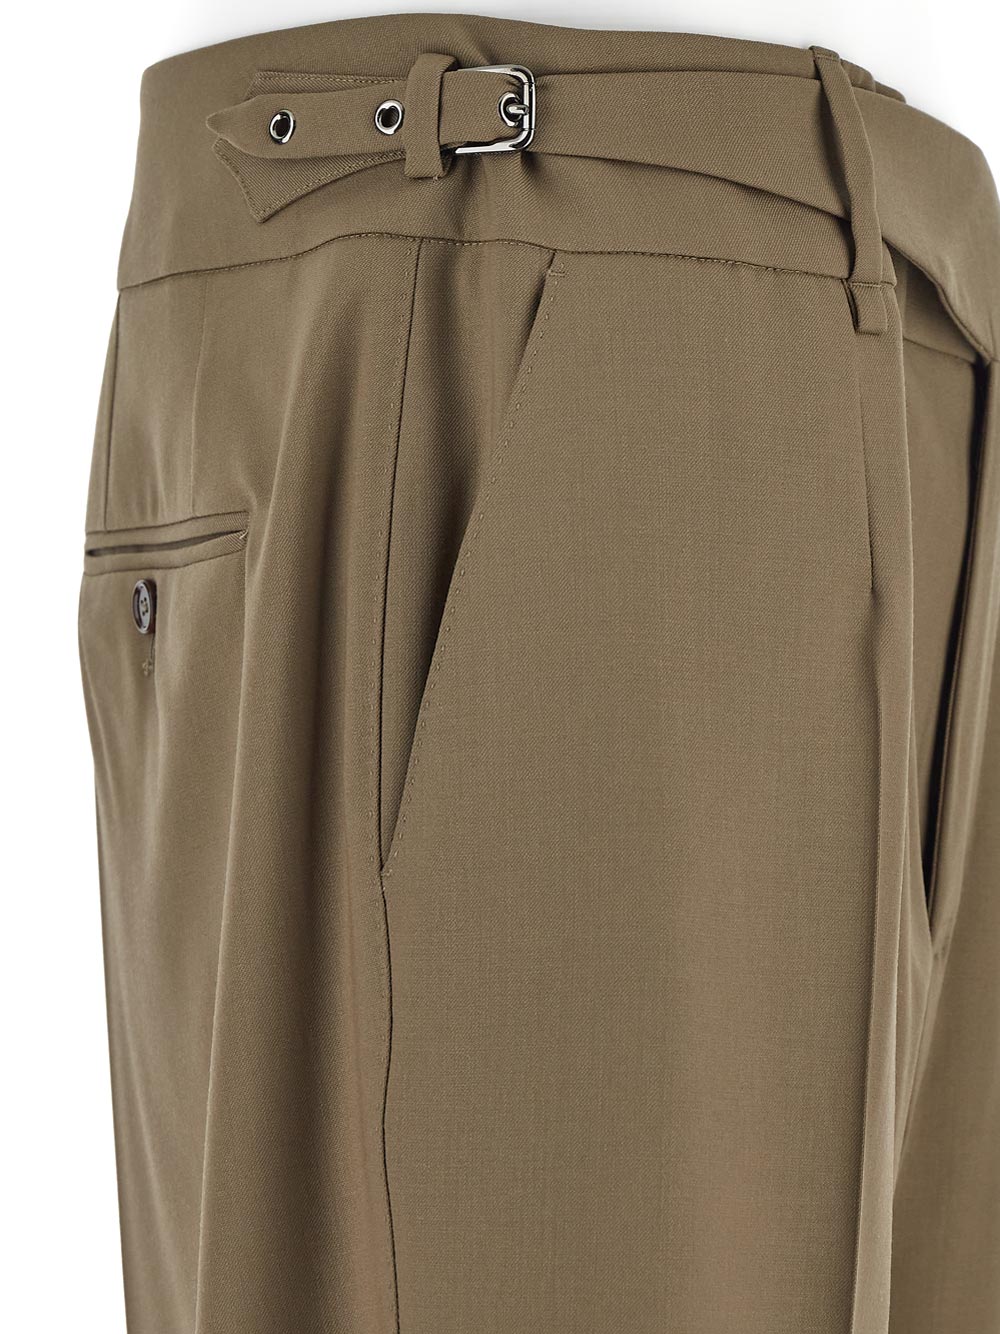 Dolce & Gabbana Tailored Two-Way Stretch Twill Pants